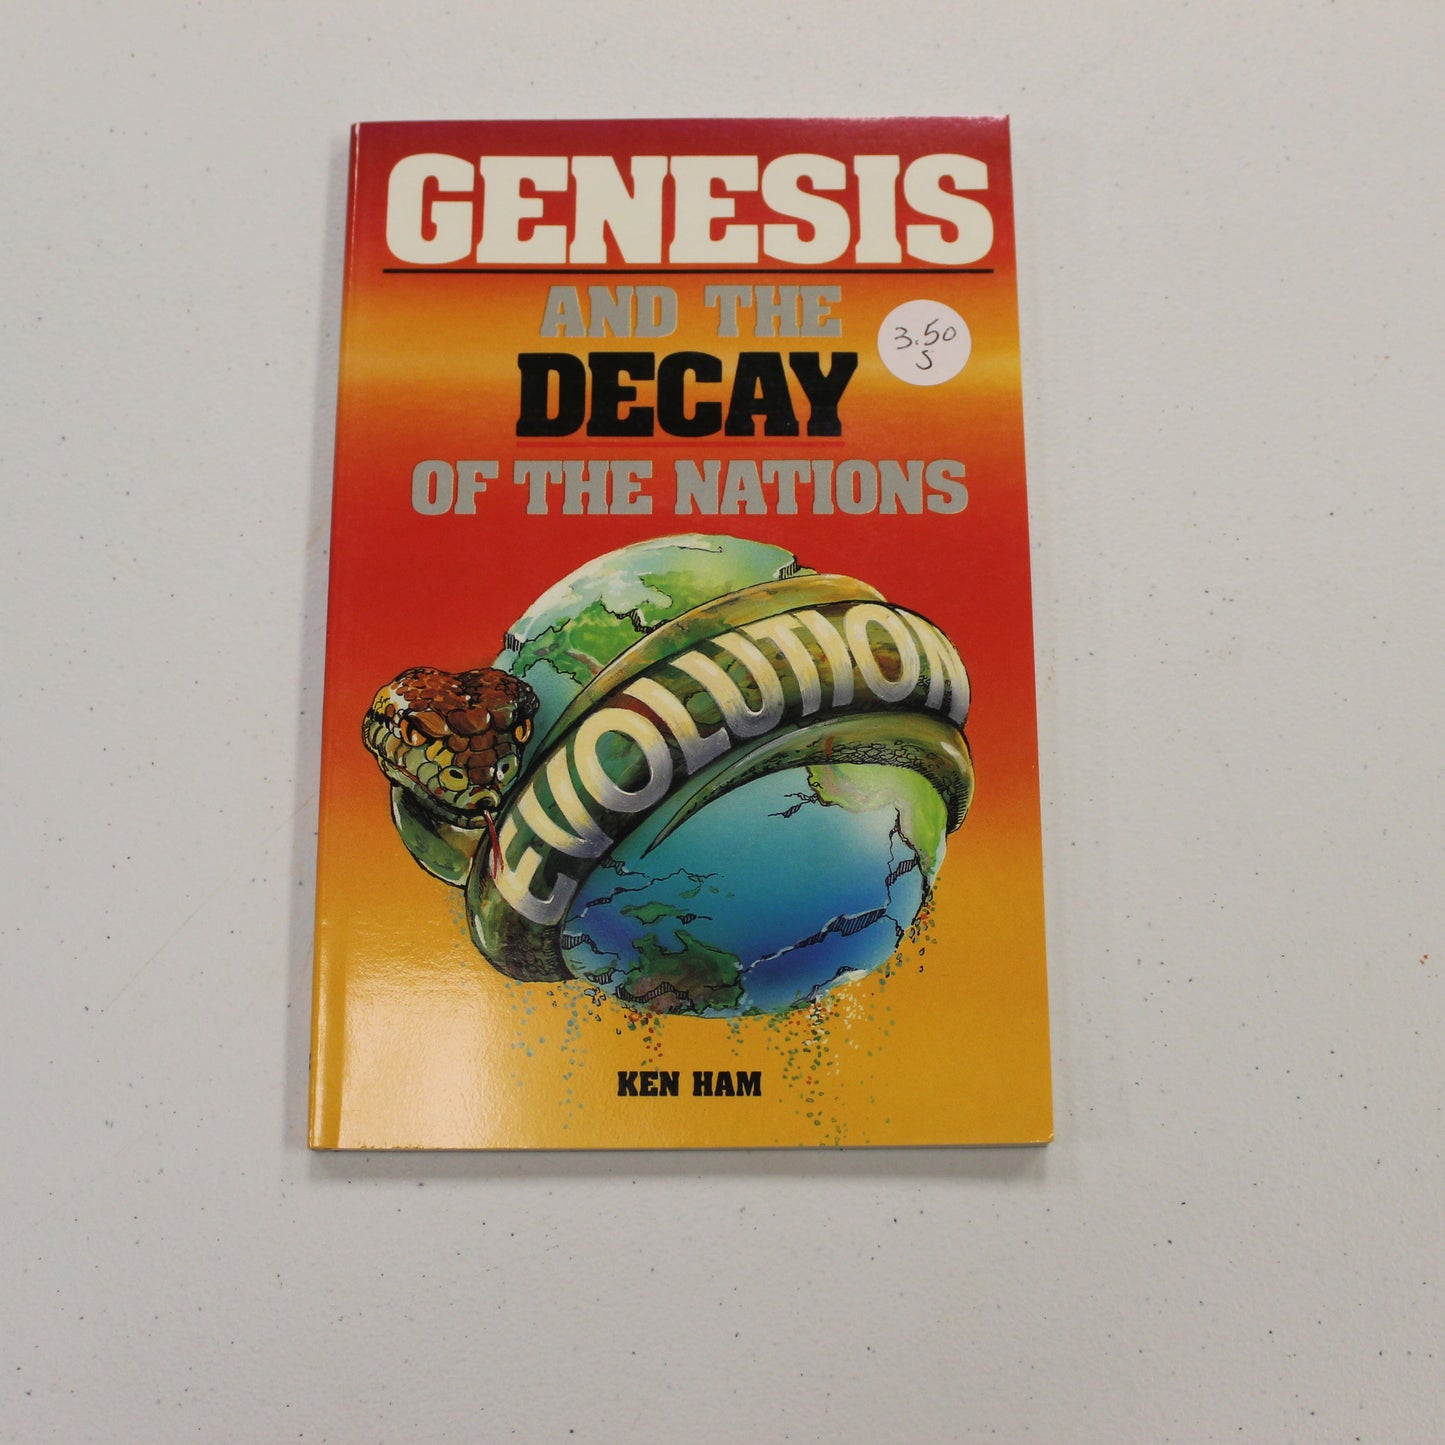 GENESIS AND THE DECAY OF THE NATIONS